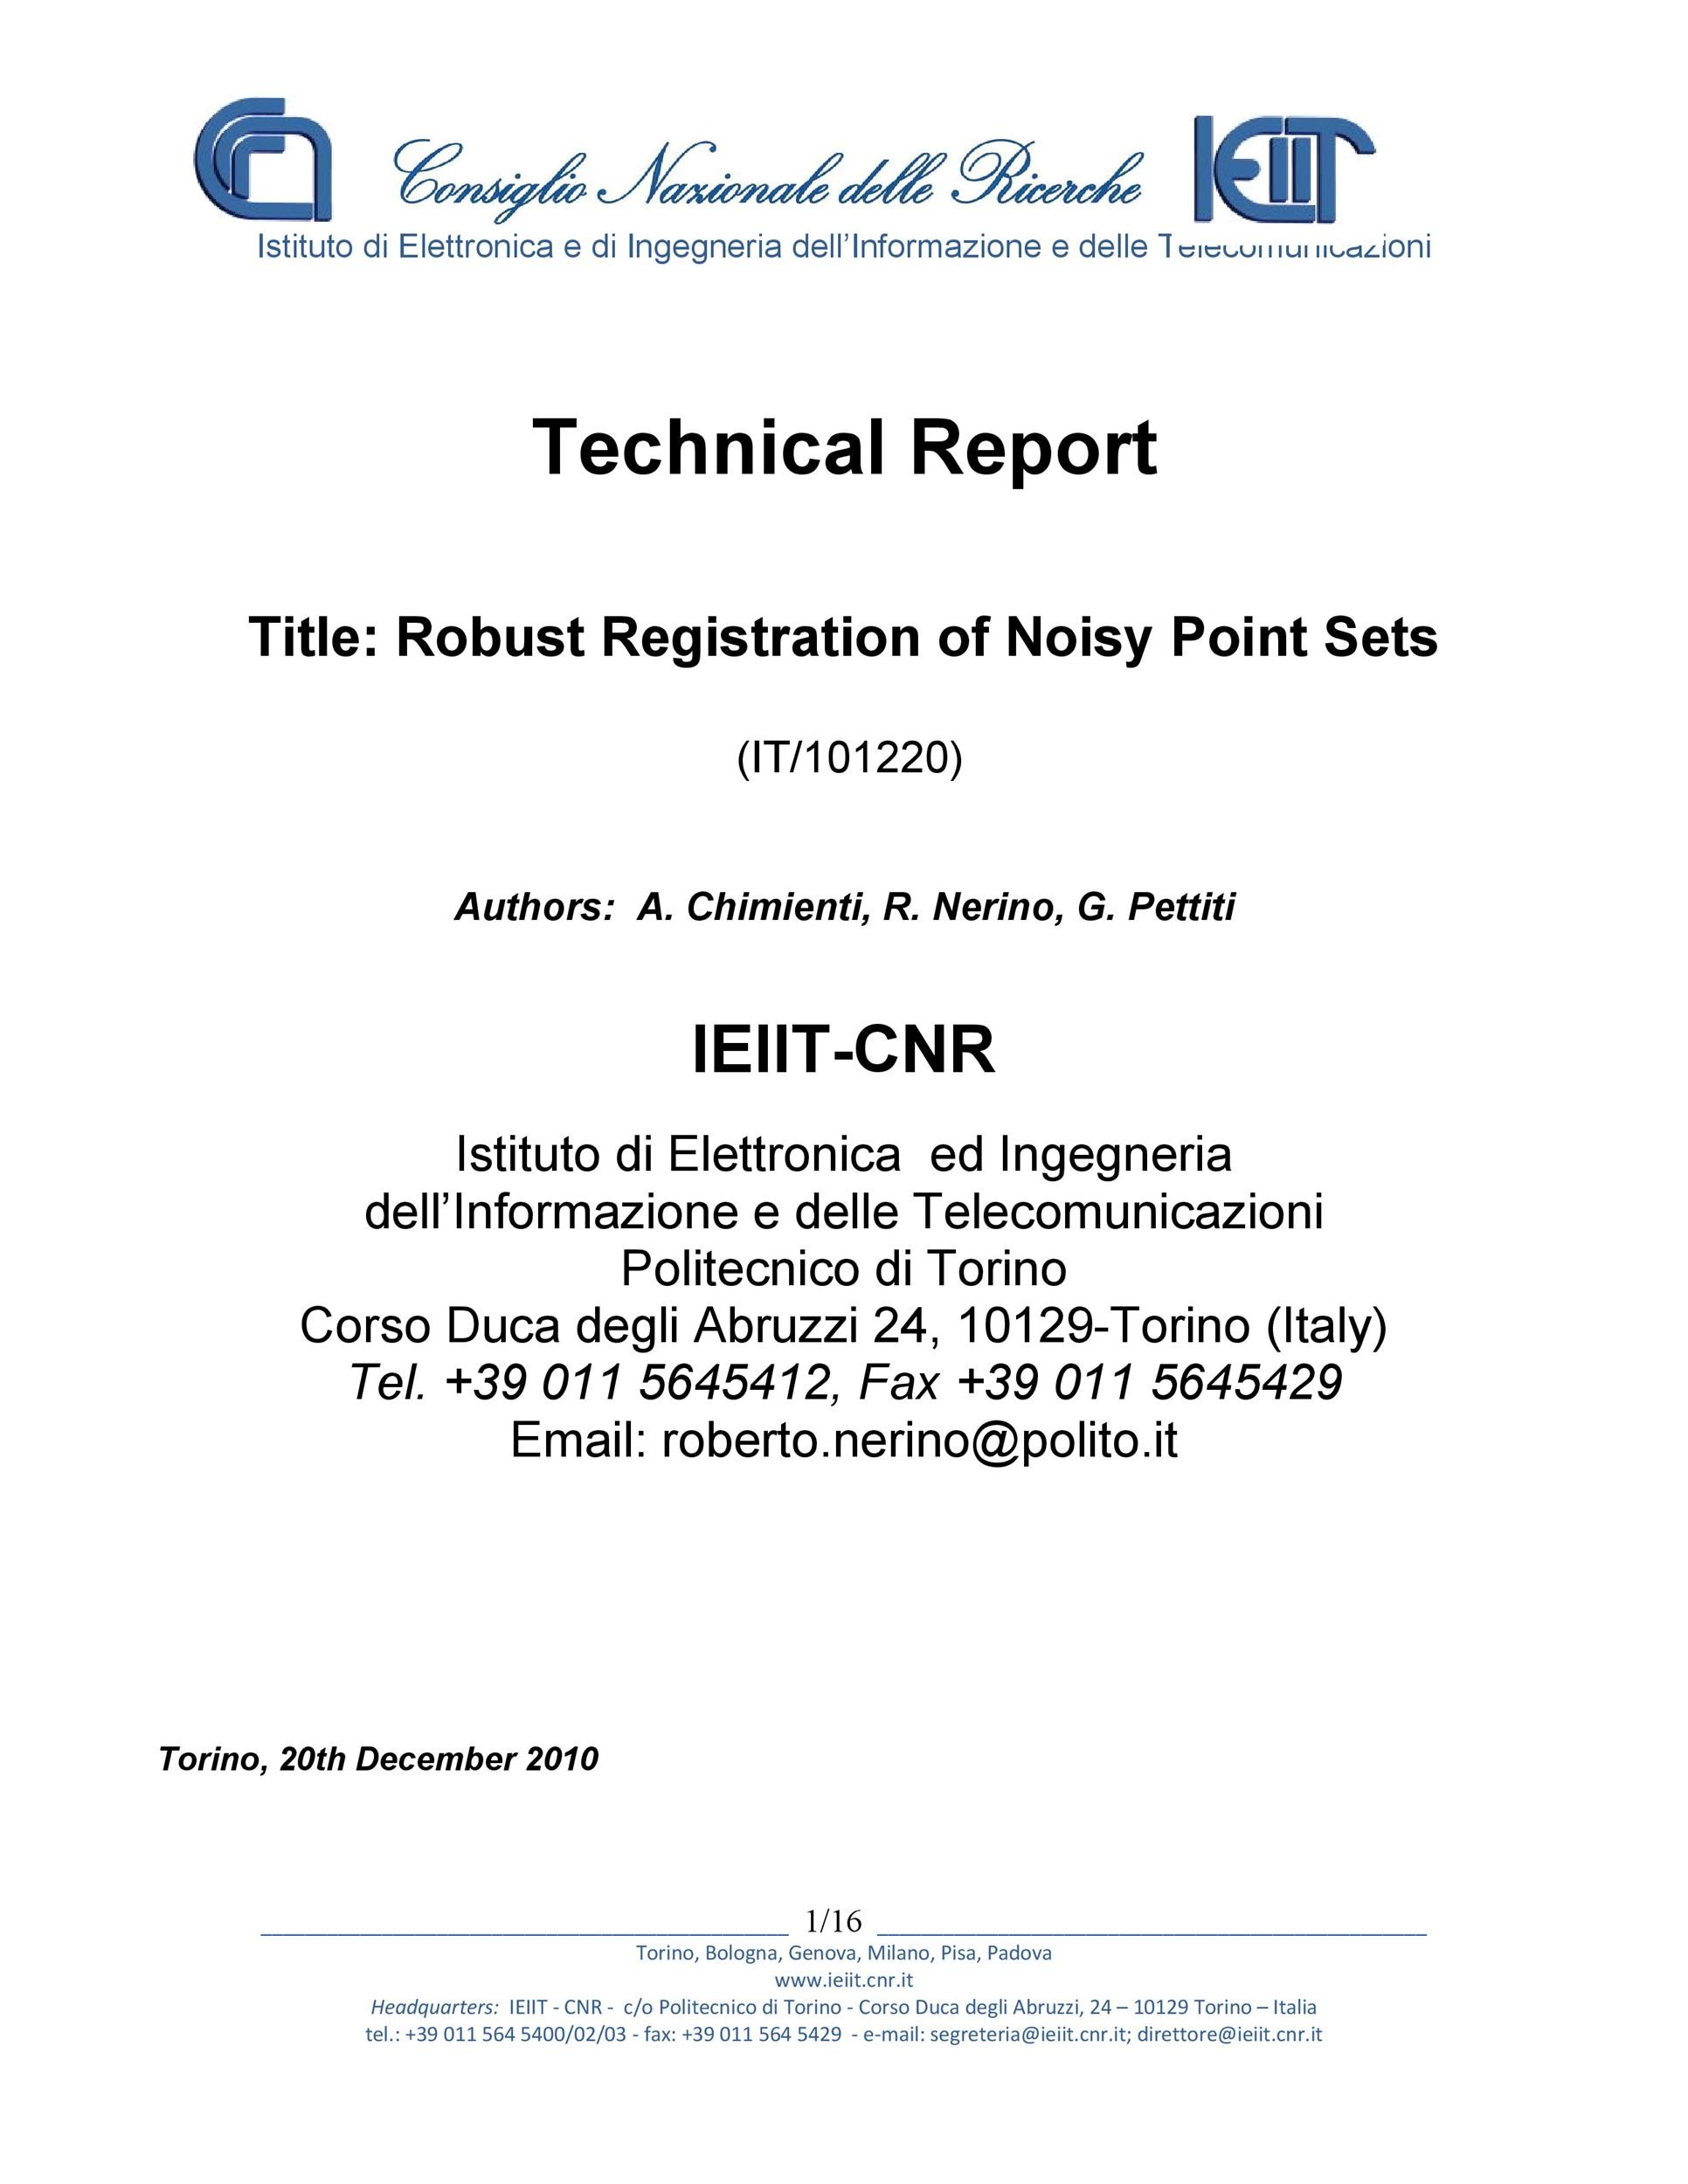 19 Professional Technical Report Examples (+Format Samples) ᐅ